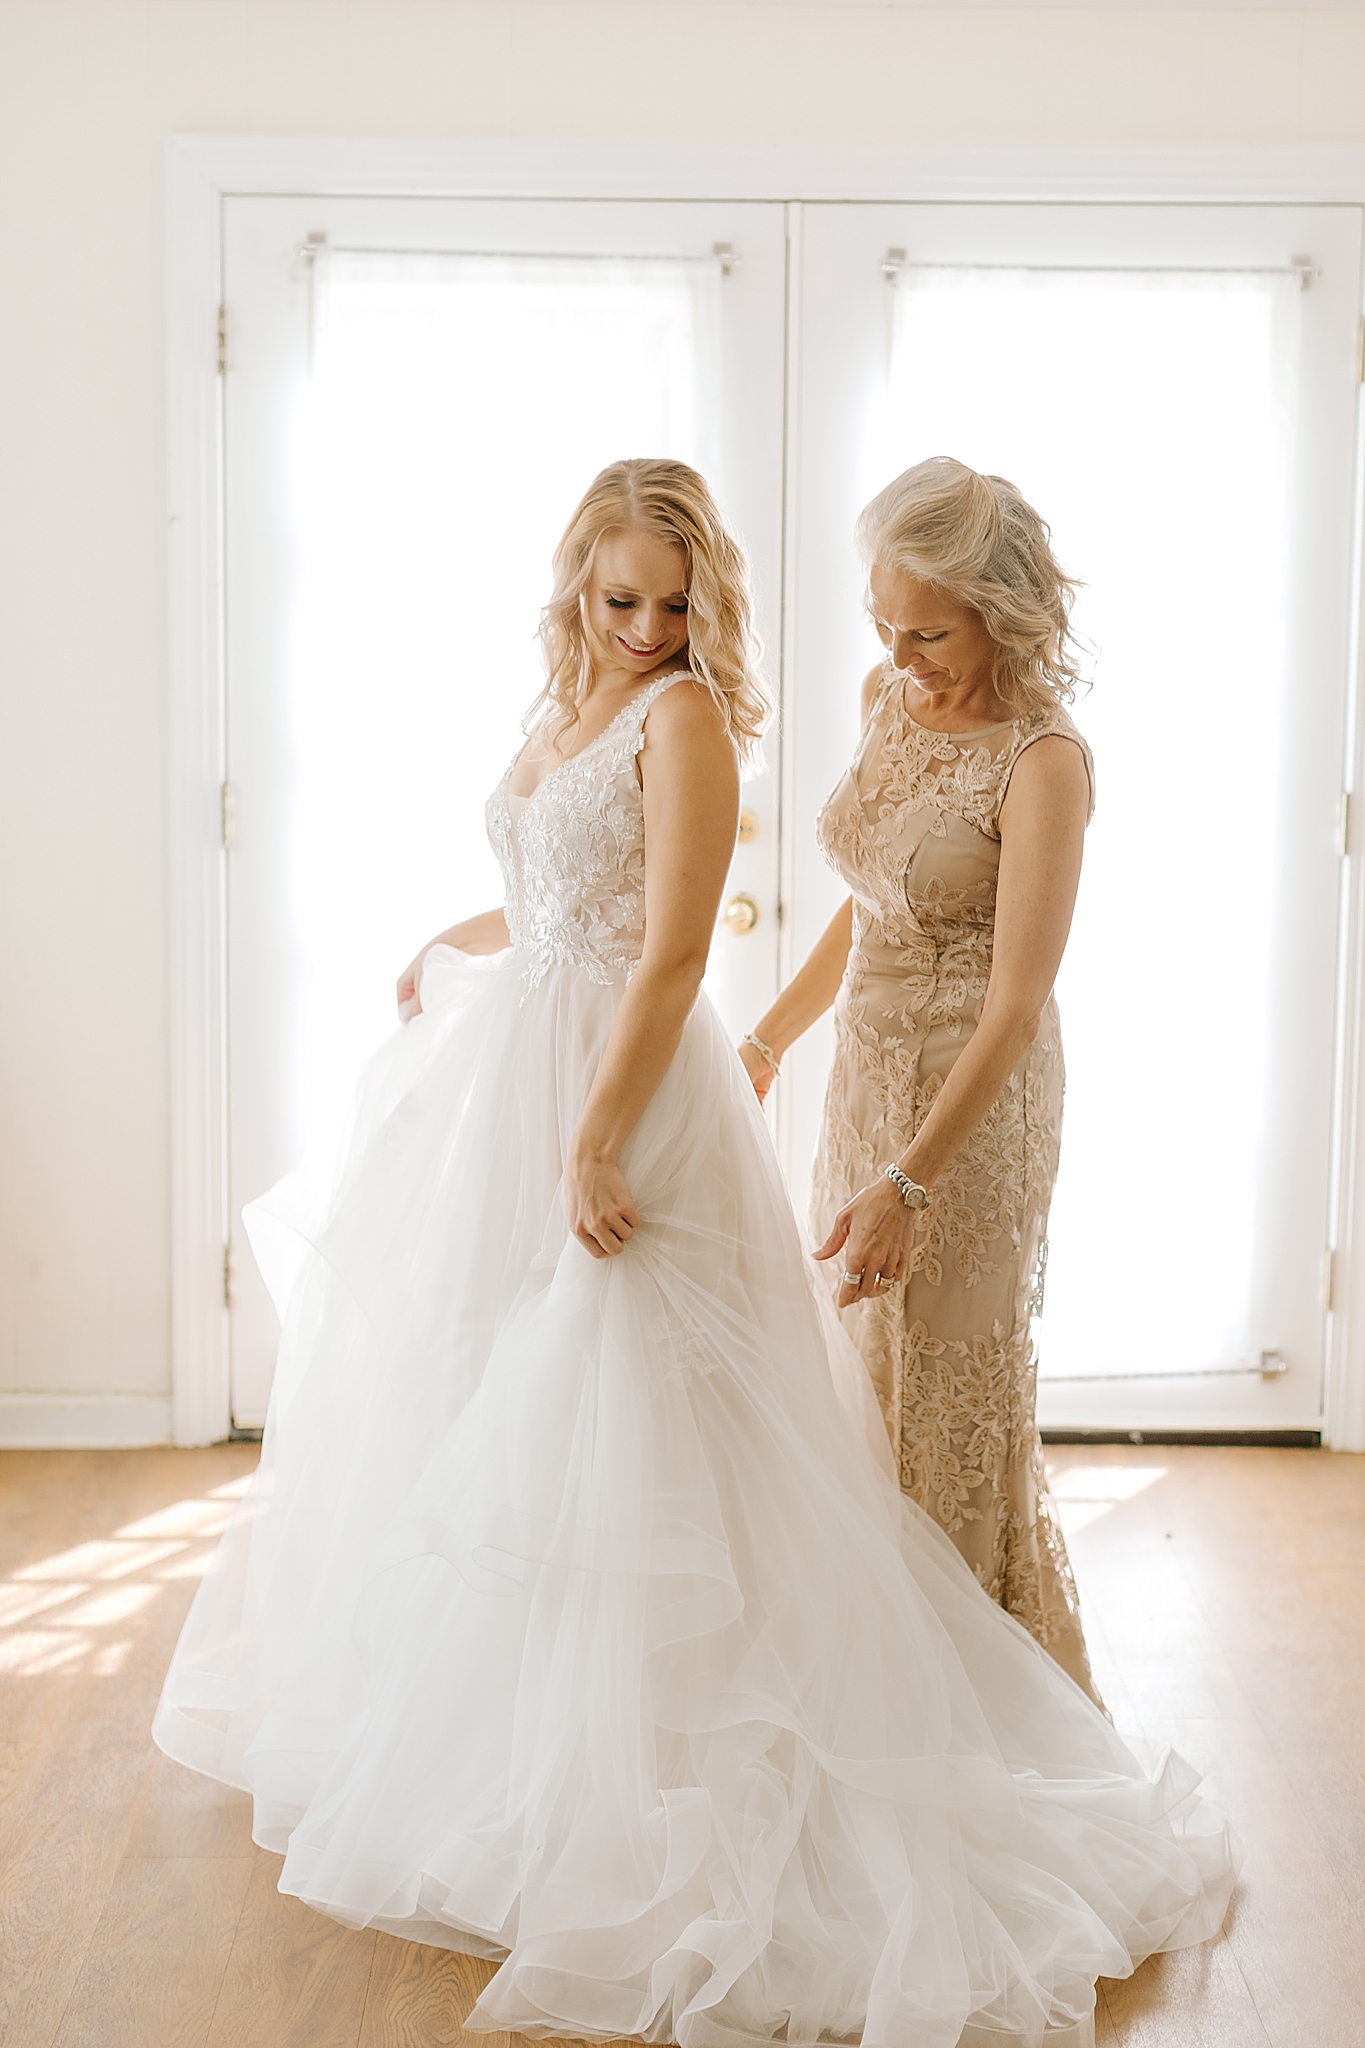 mom adjusts bride's gown during morning prep